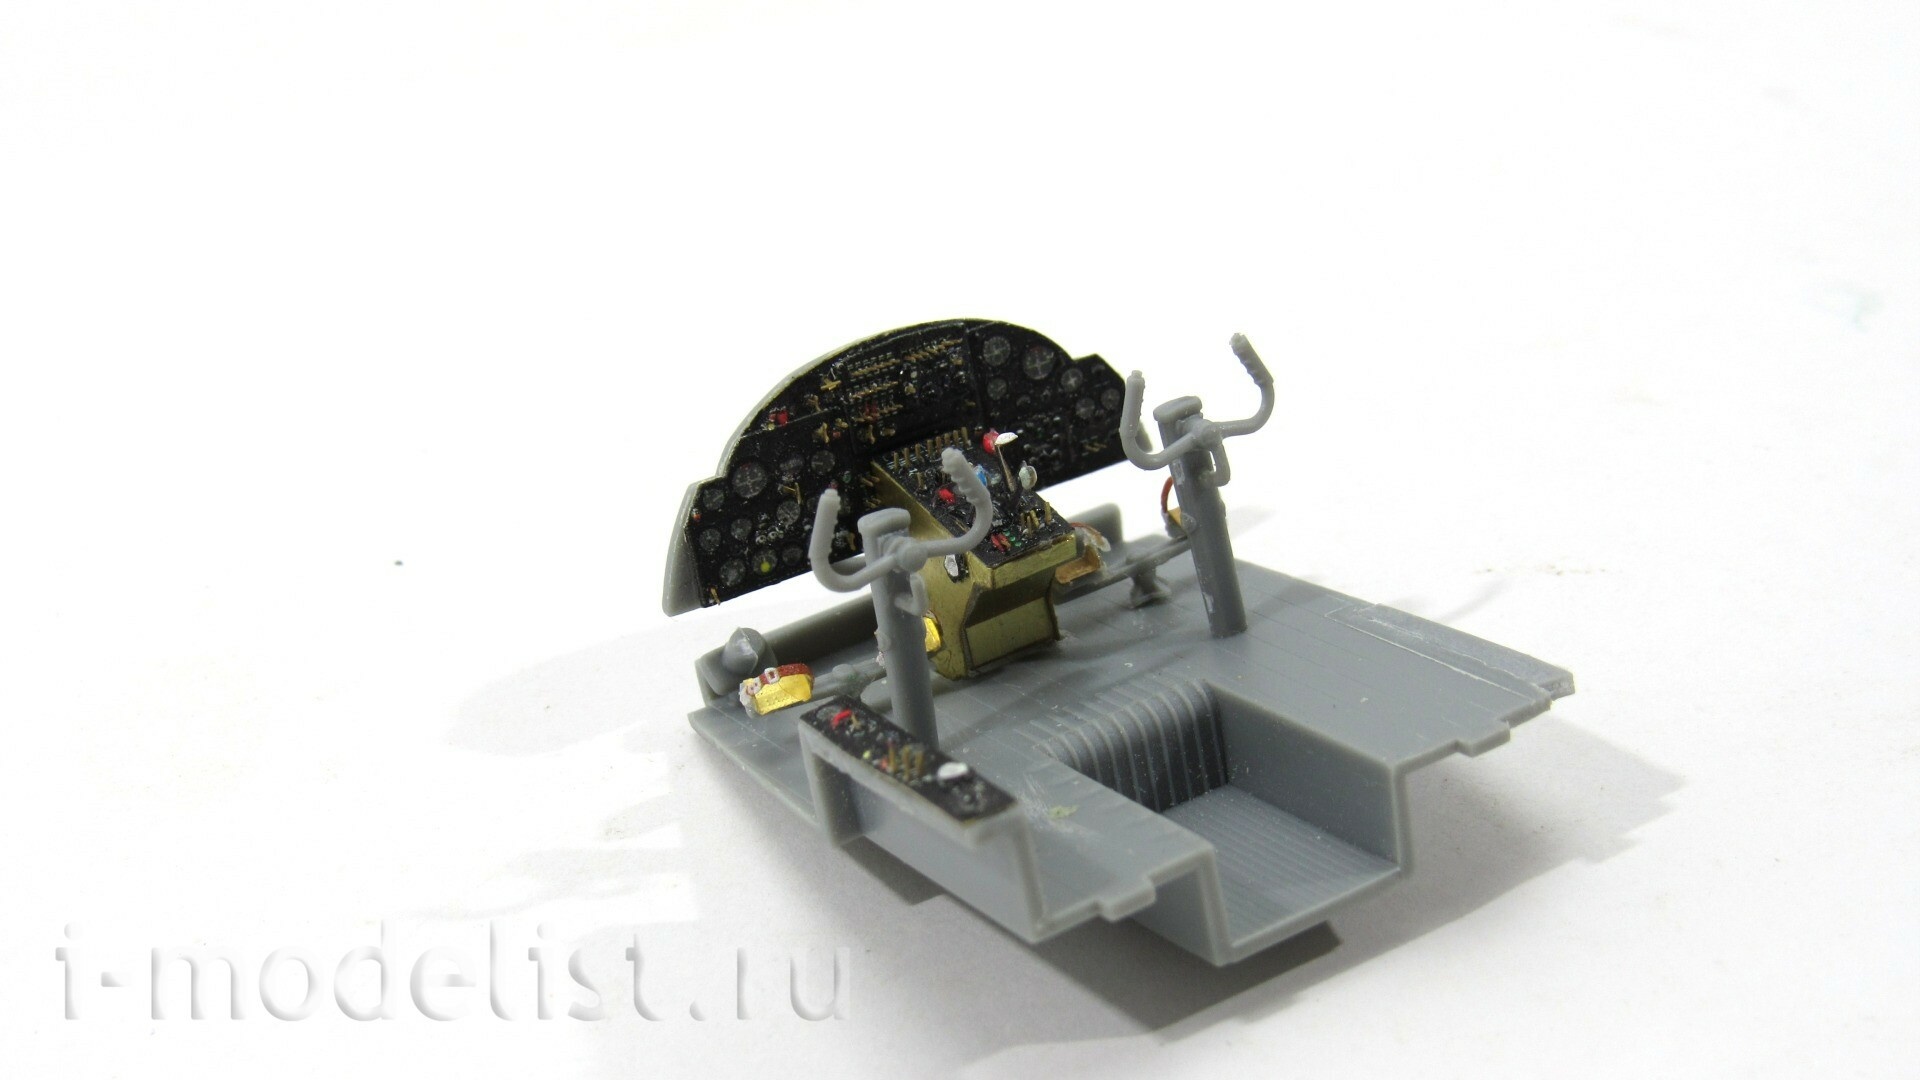 048042 Microdesign 1/48 Photo etching kit for AN-2 (interior)